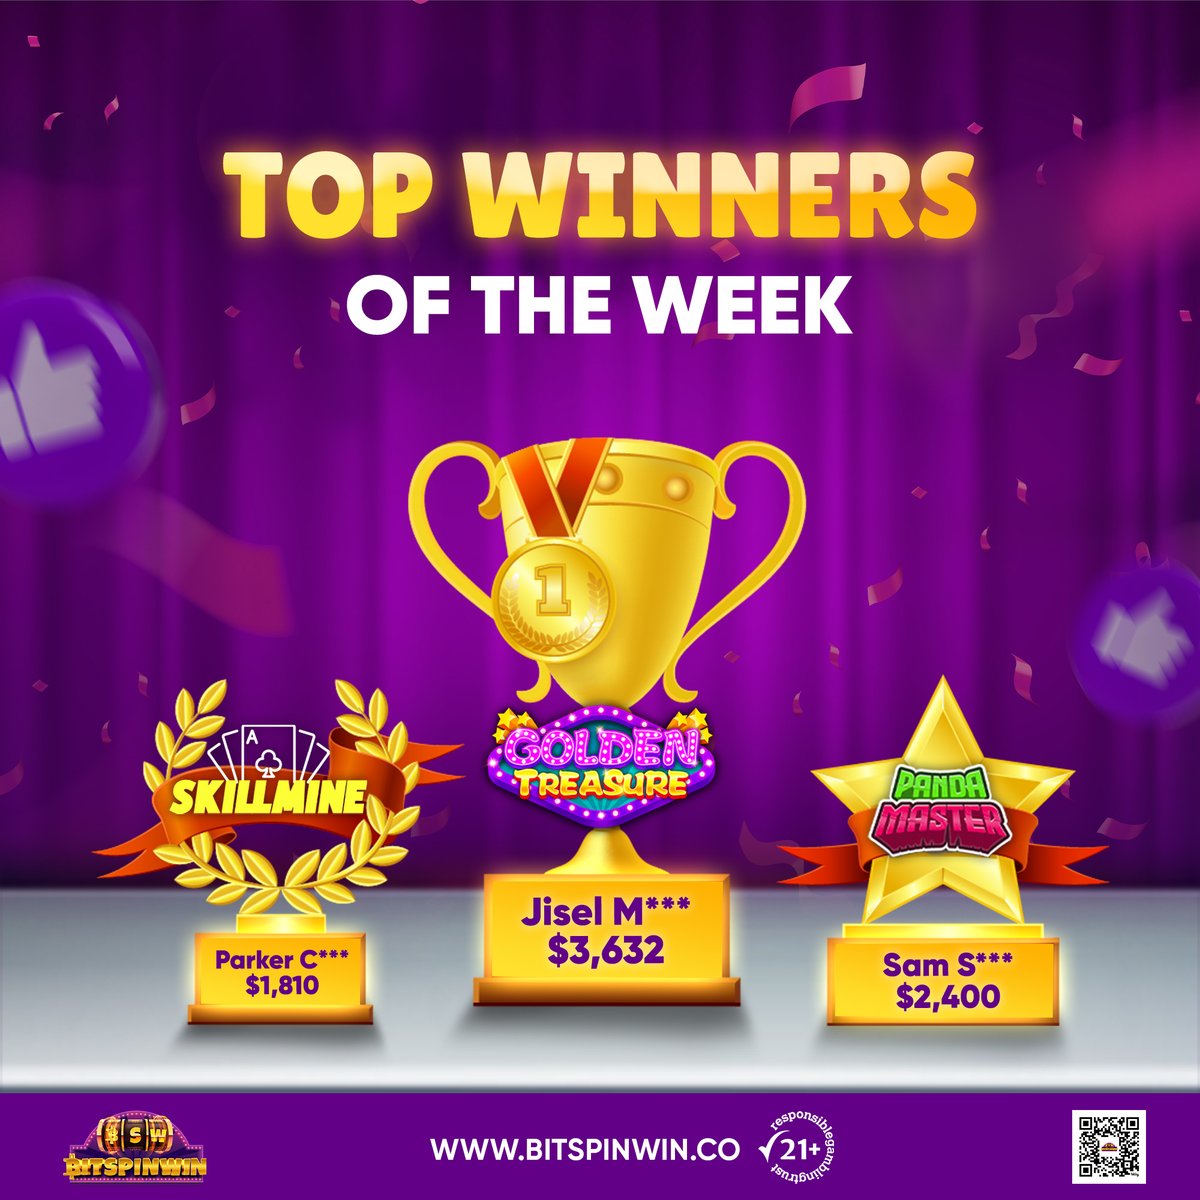 🎉Top 3 Winners scored high on... Skillmine, Golden Treasure & Panda Master! 😍 Could YOU be the next to unlock a massive payout? 🎰𝐃𝐞𝐩𝐨𝐬𝐢𝐭 𝐍𝐨𝐰: bit.ly/twdepositbsw . #tacotuesday #connection #greenfield #gamblingtwitter #slotgames #casinobonus #onlinecasino #USA